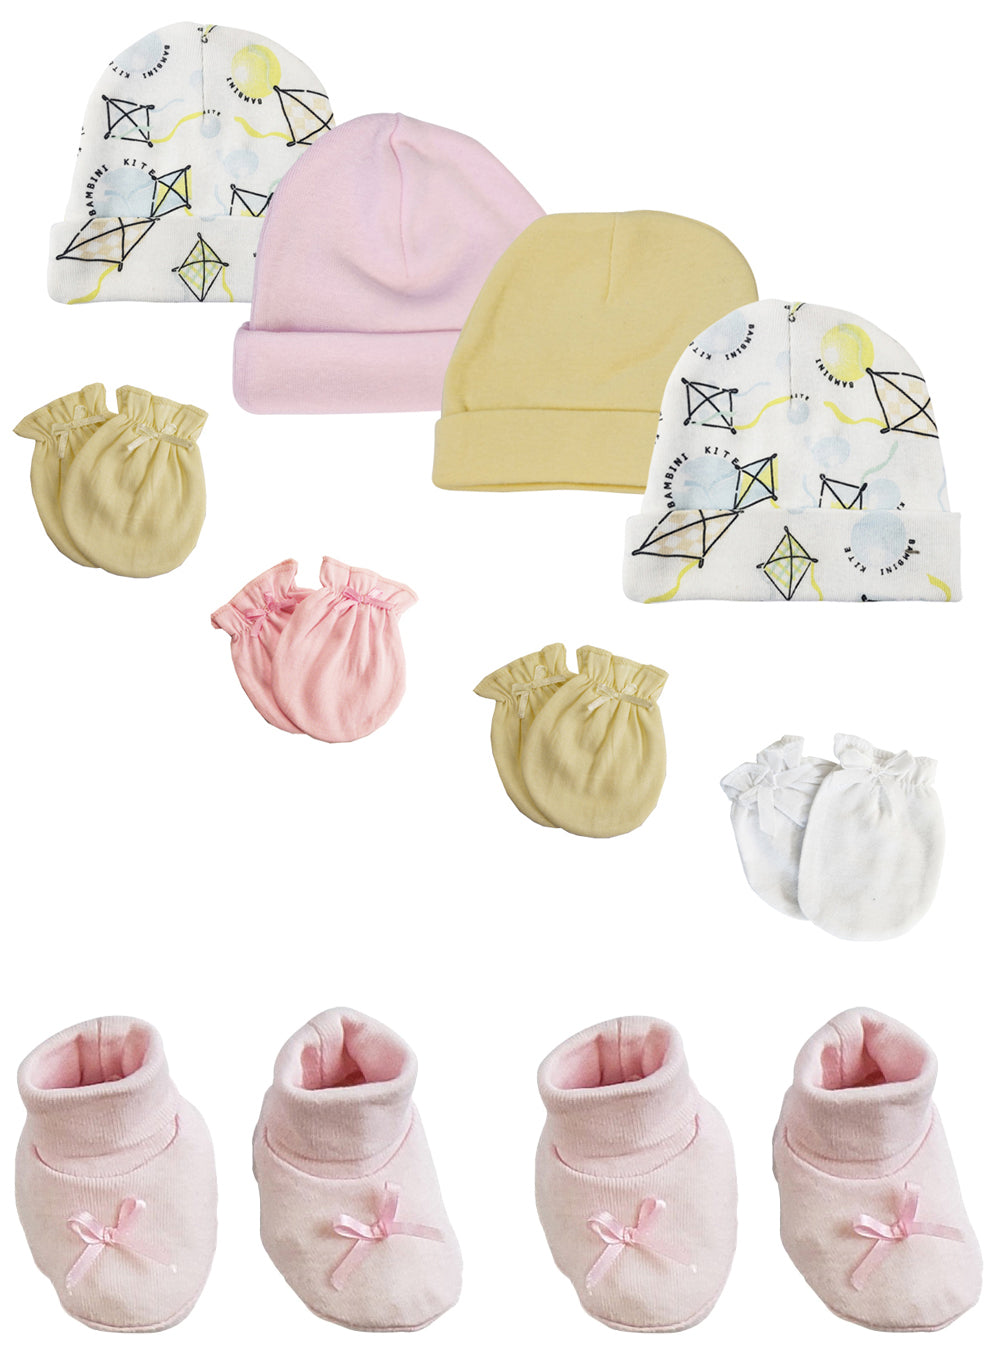 Preemie Baby Girl Caps with Infant Mittens and Booties - 10 Pack NC_0220